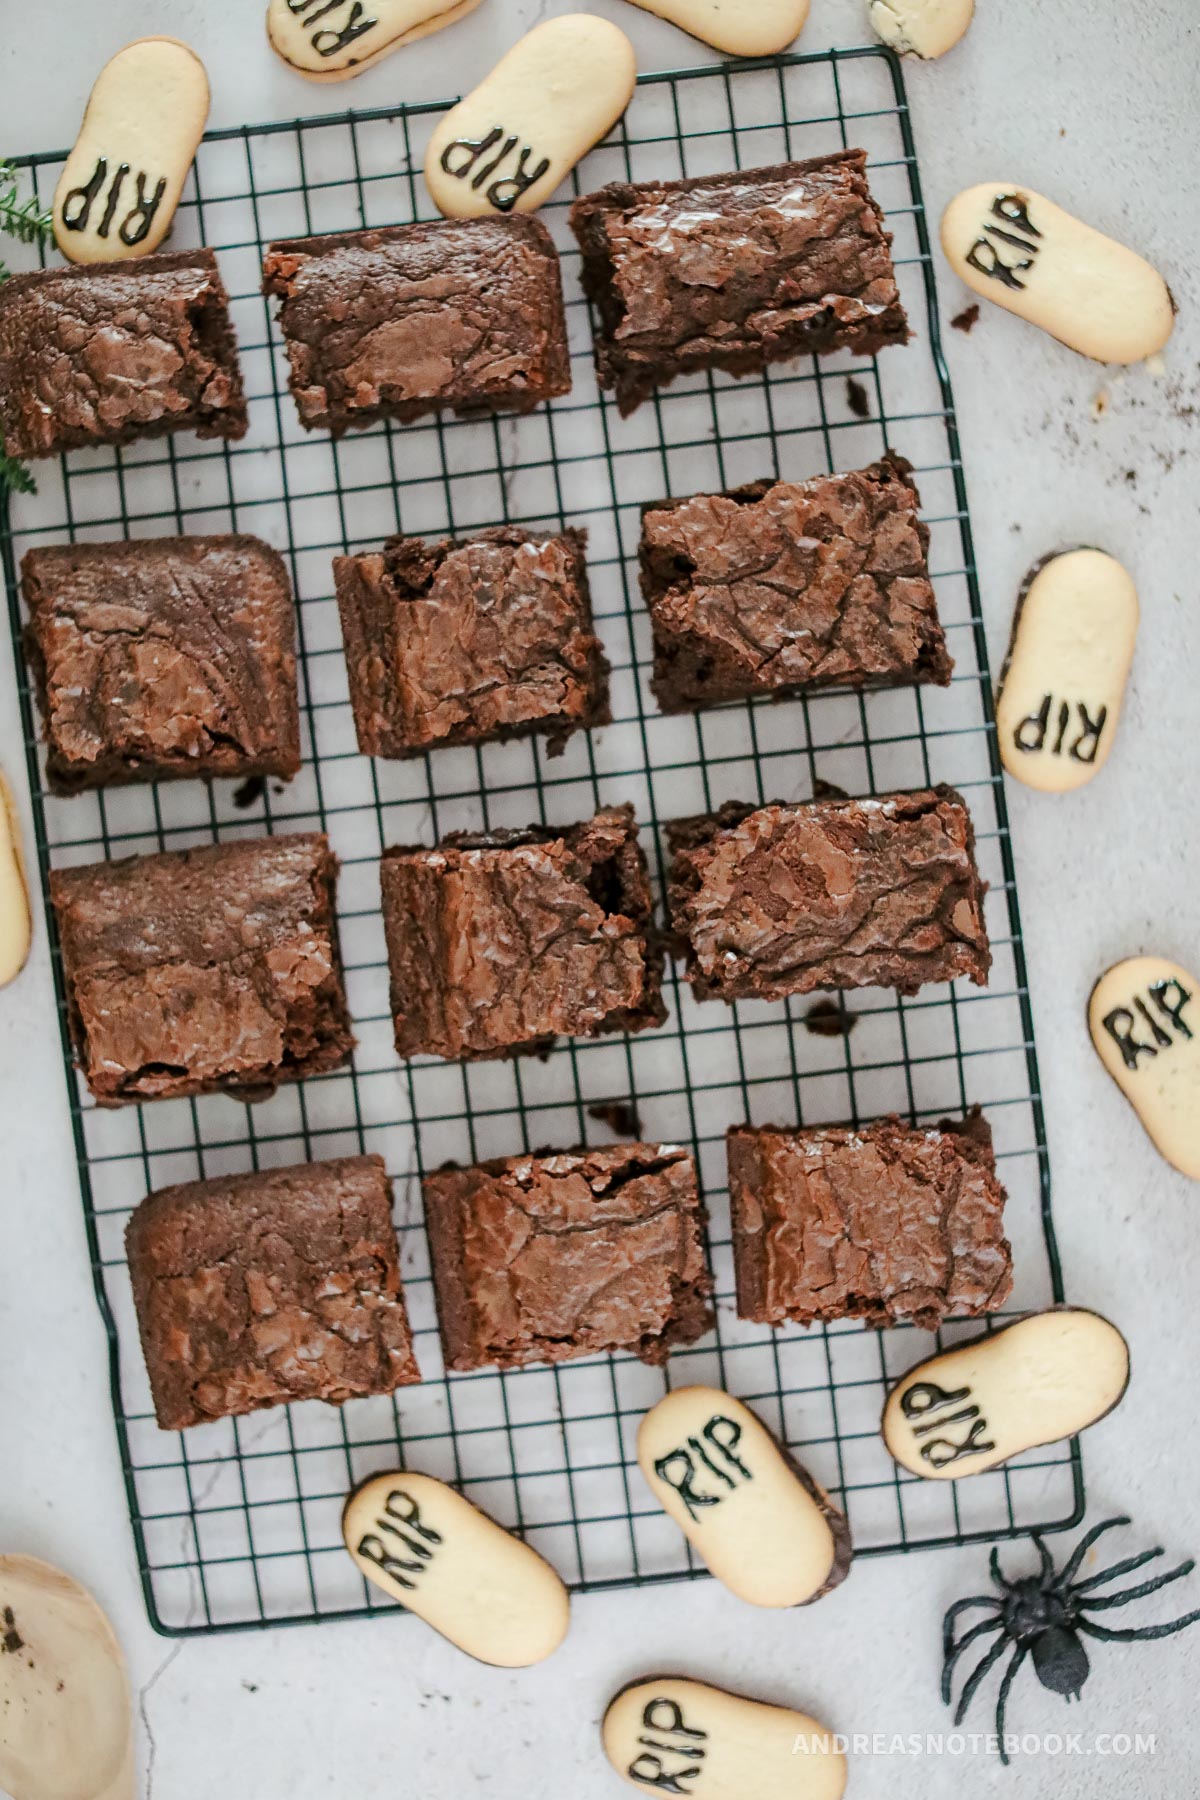 Brownies cut into rectangles.